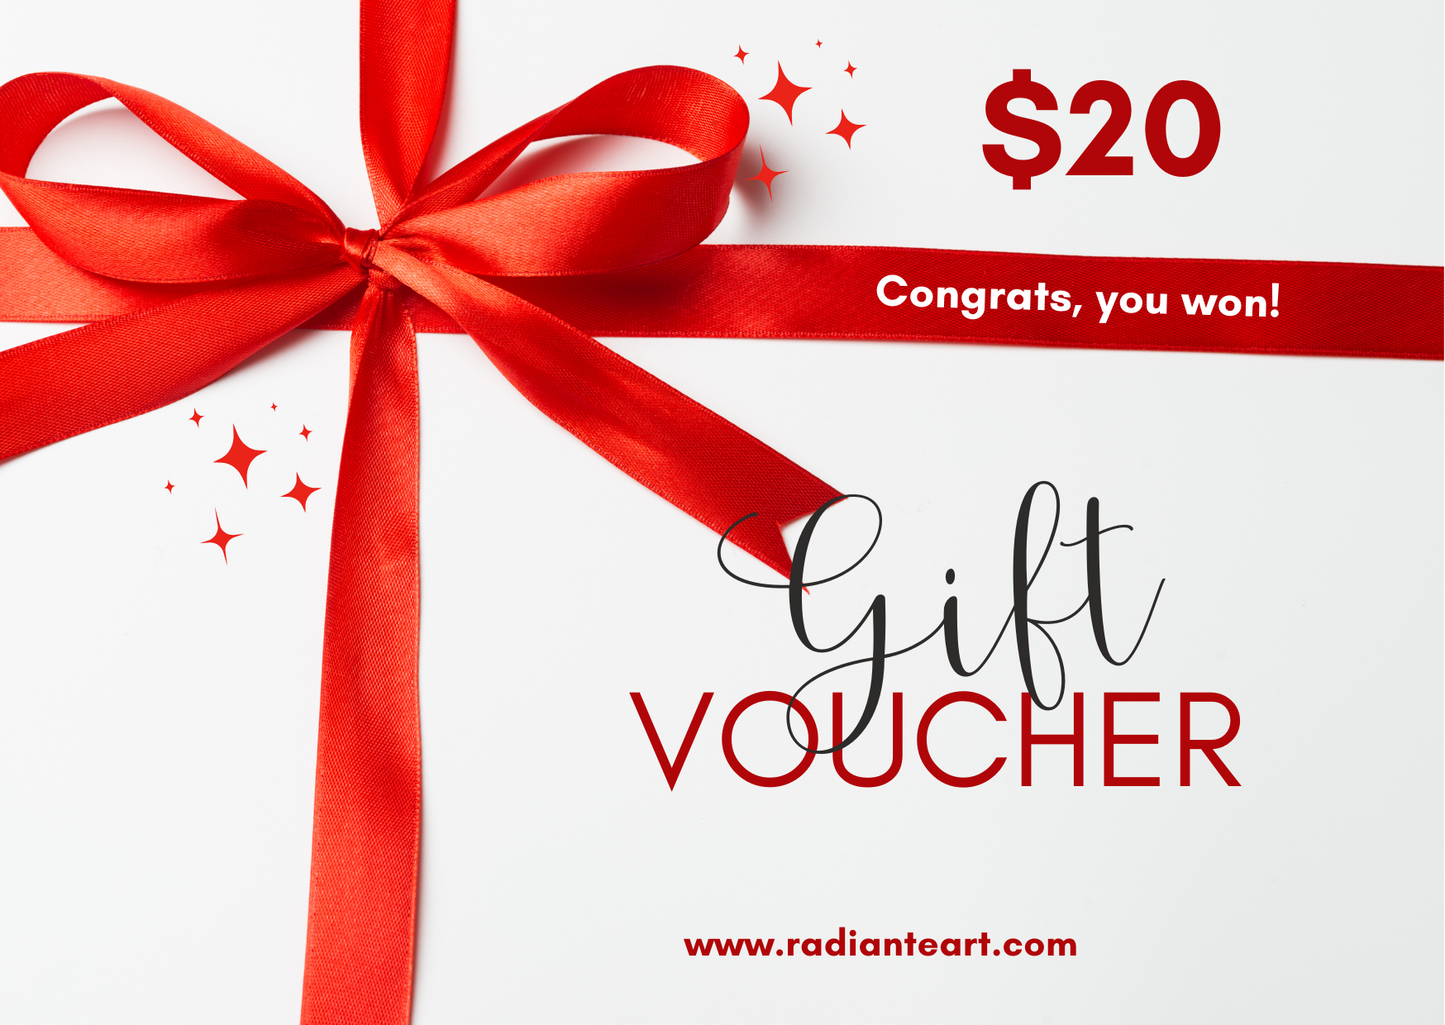 YOU RECEIVED THIS GIFT CARD FROM RADIANTE ART FOR US$ 20